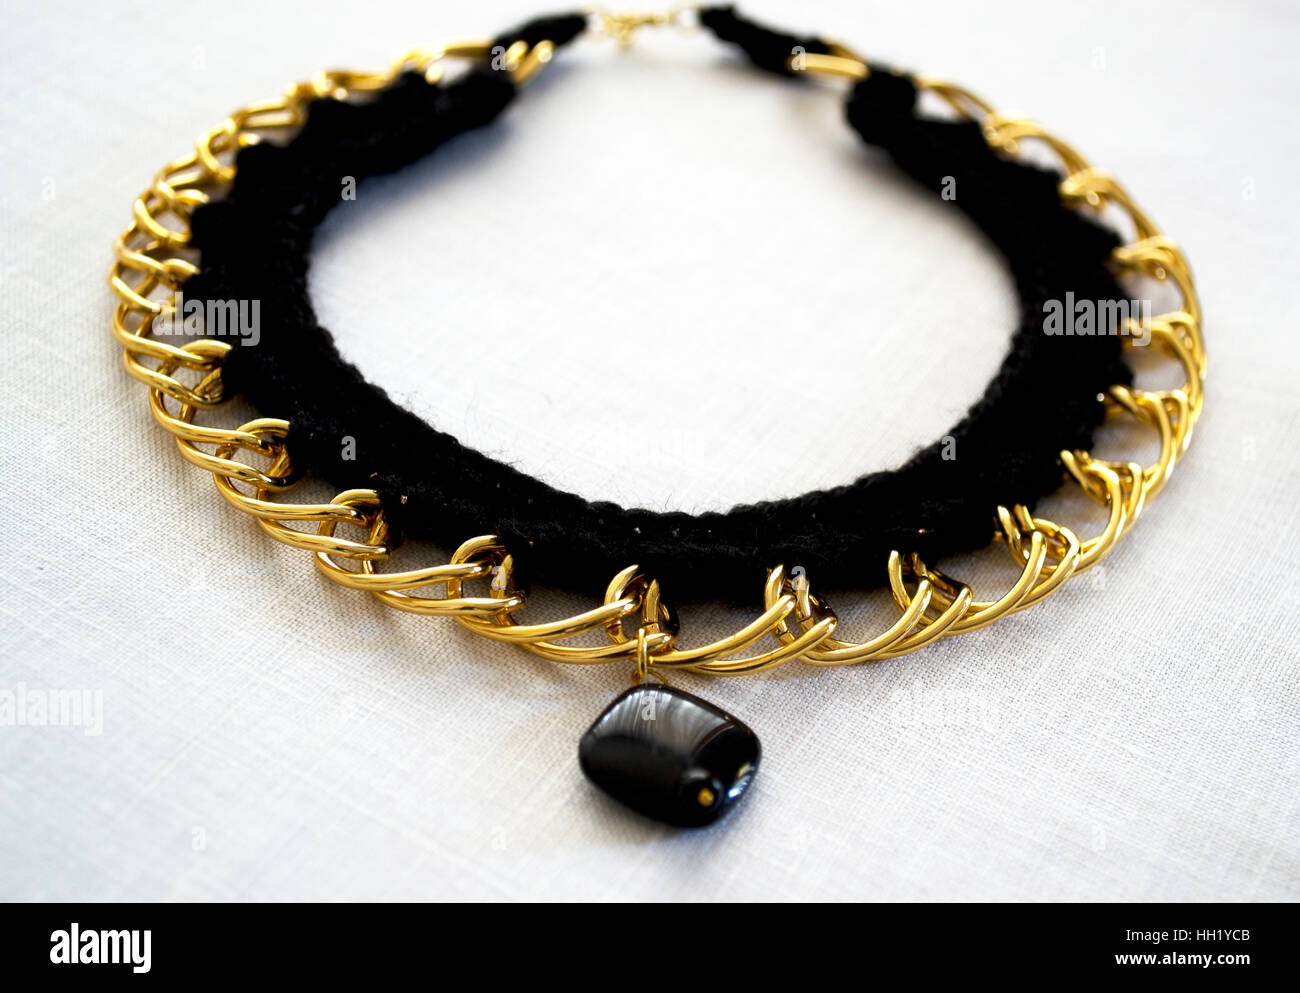 Gold Chain Stock Photos & Gold Chain Stock Images - Alamy